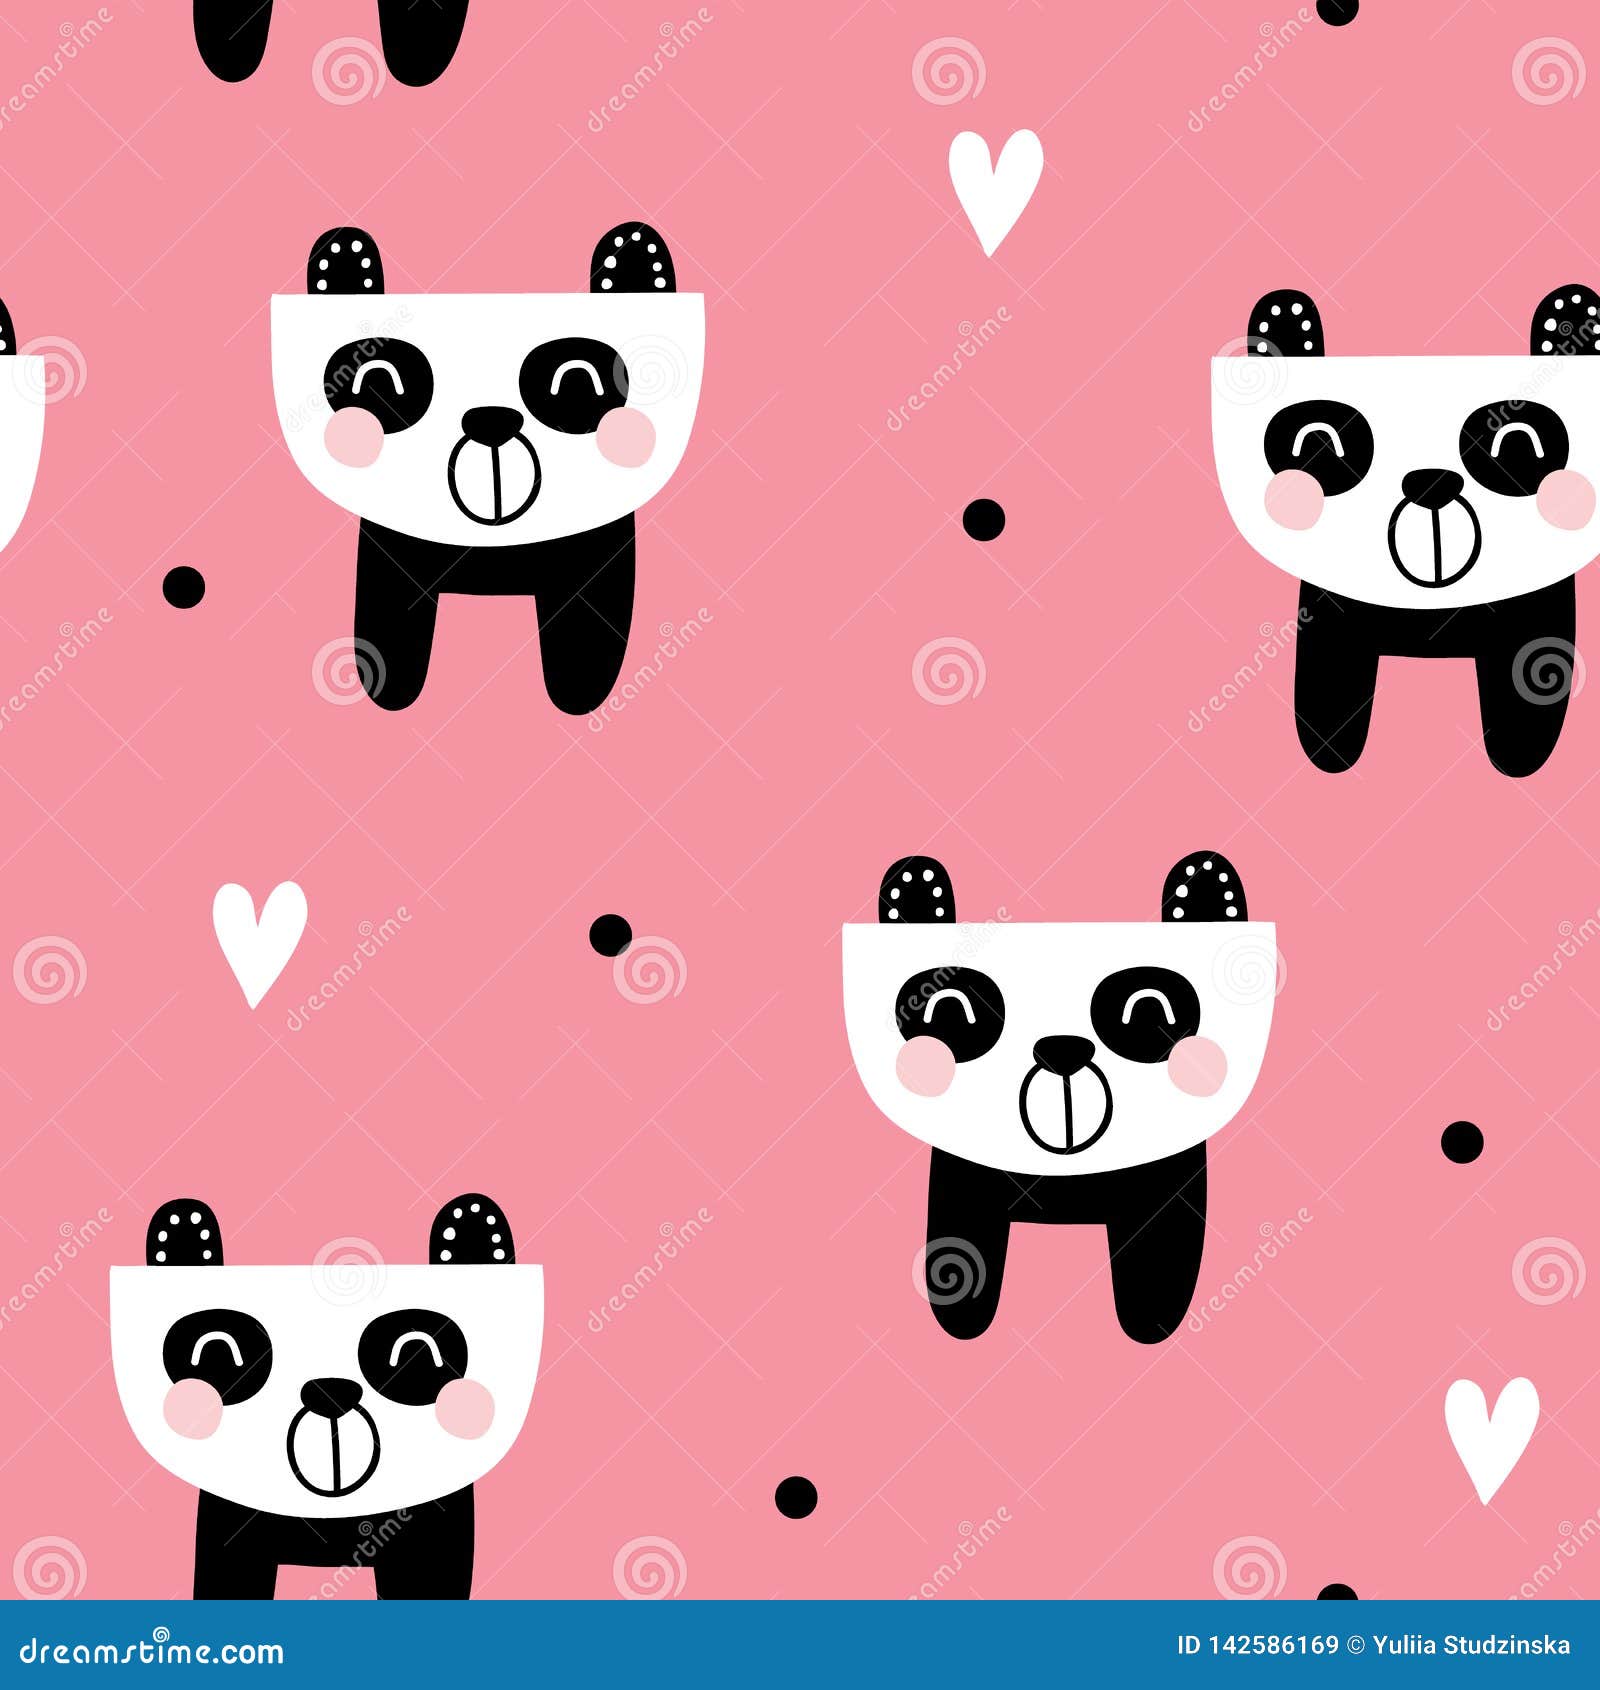 Baby Pandas for girls stock vector. Illustration of doodle - 142586169